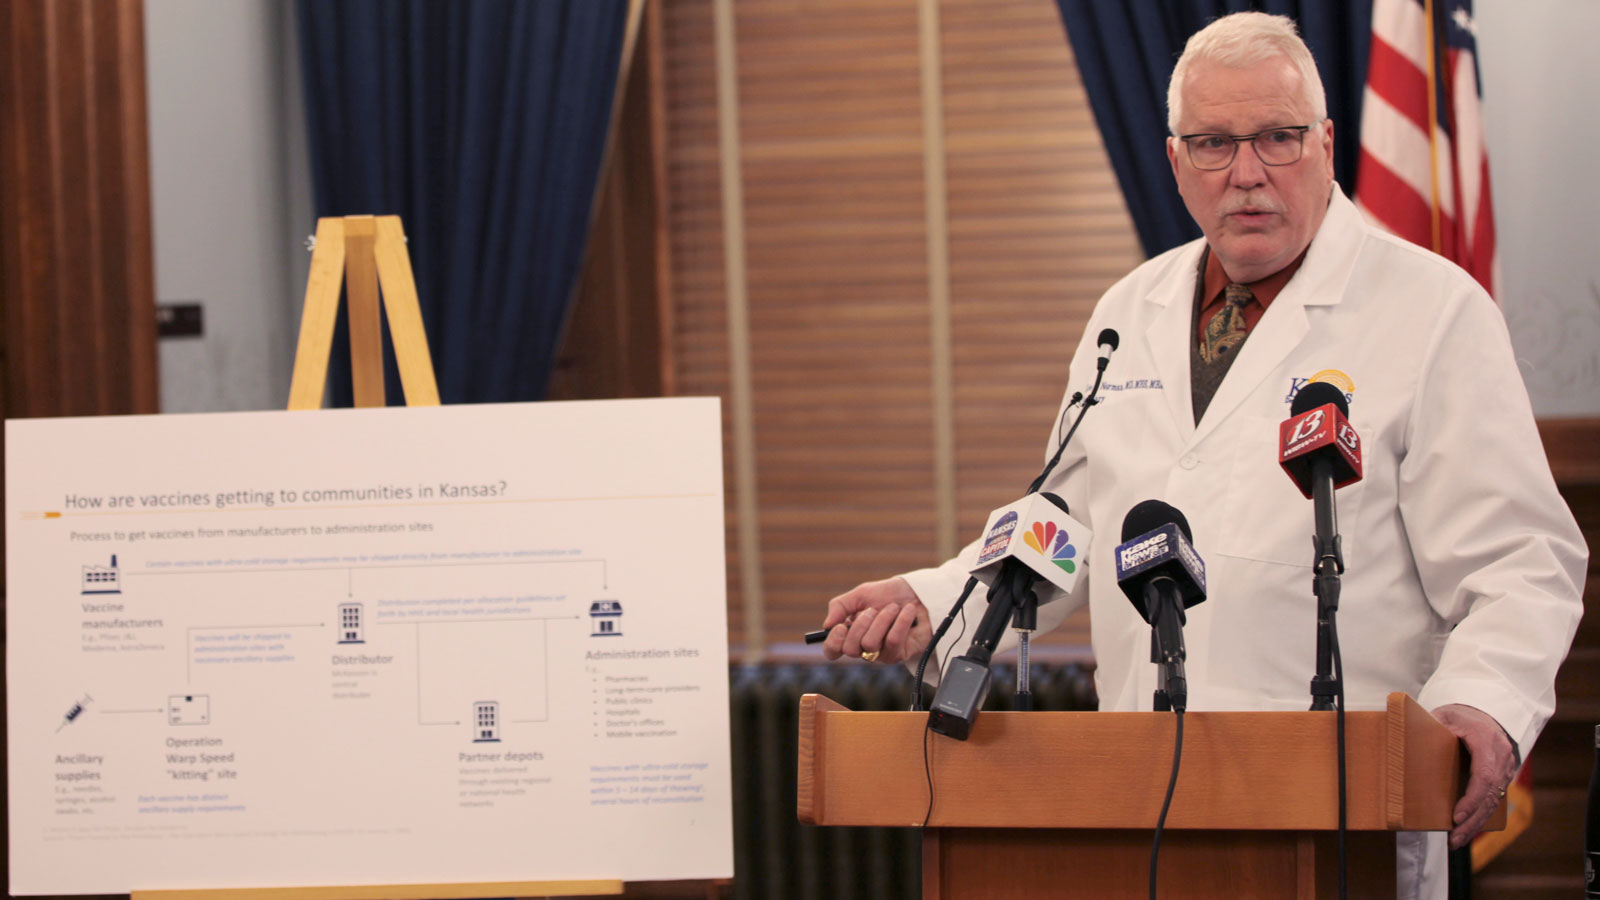 Dr. Lee Norman, head of the Kansas Department of Health and Environment, answers questions from reporters about the Covid-19 pandemic during a news conference on Wednesday, January 27, at the Statehouse in Topeka, Kansas.